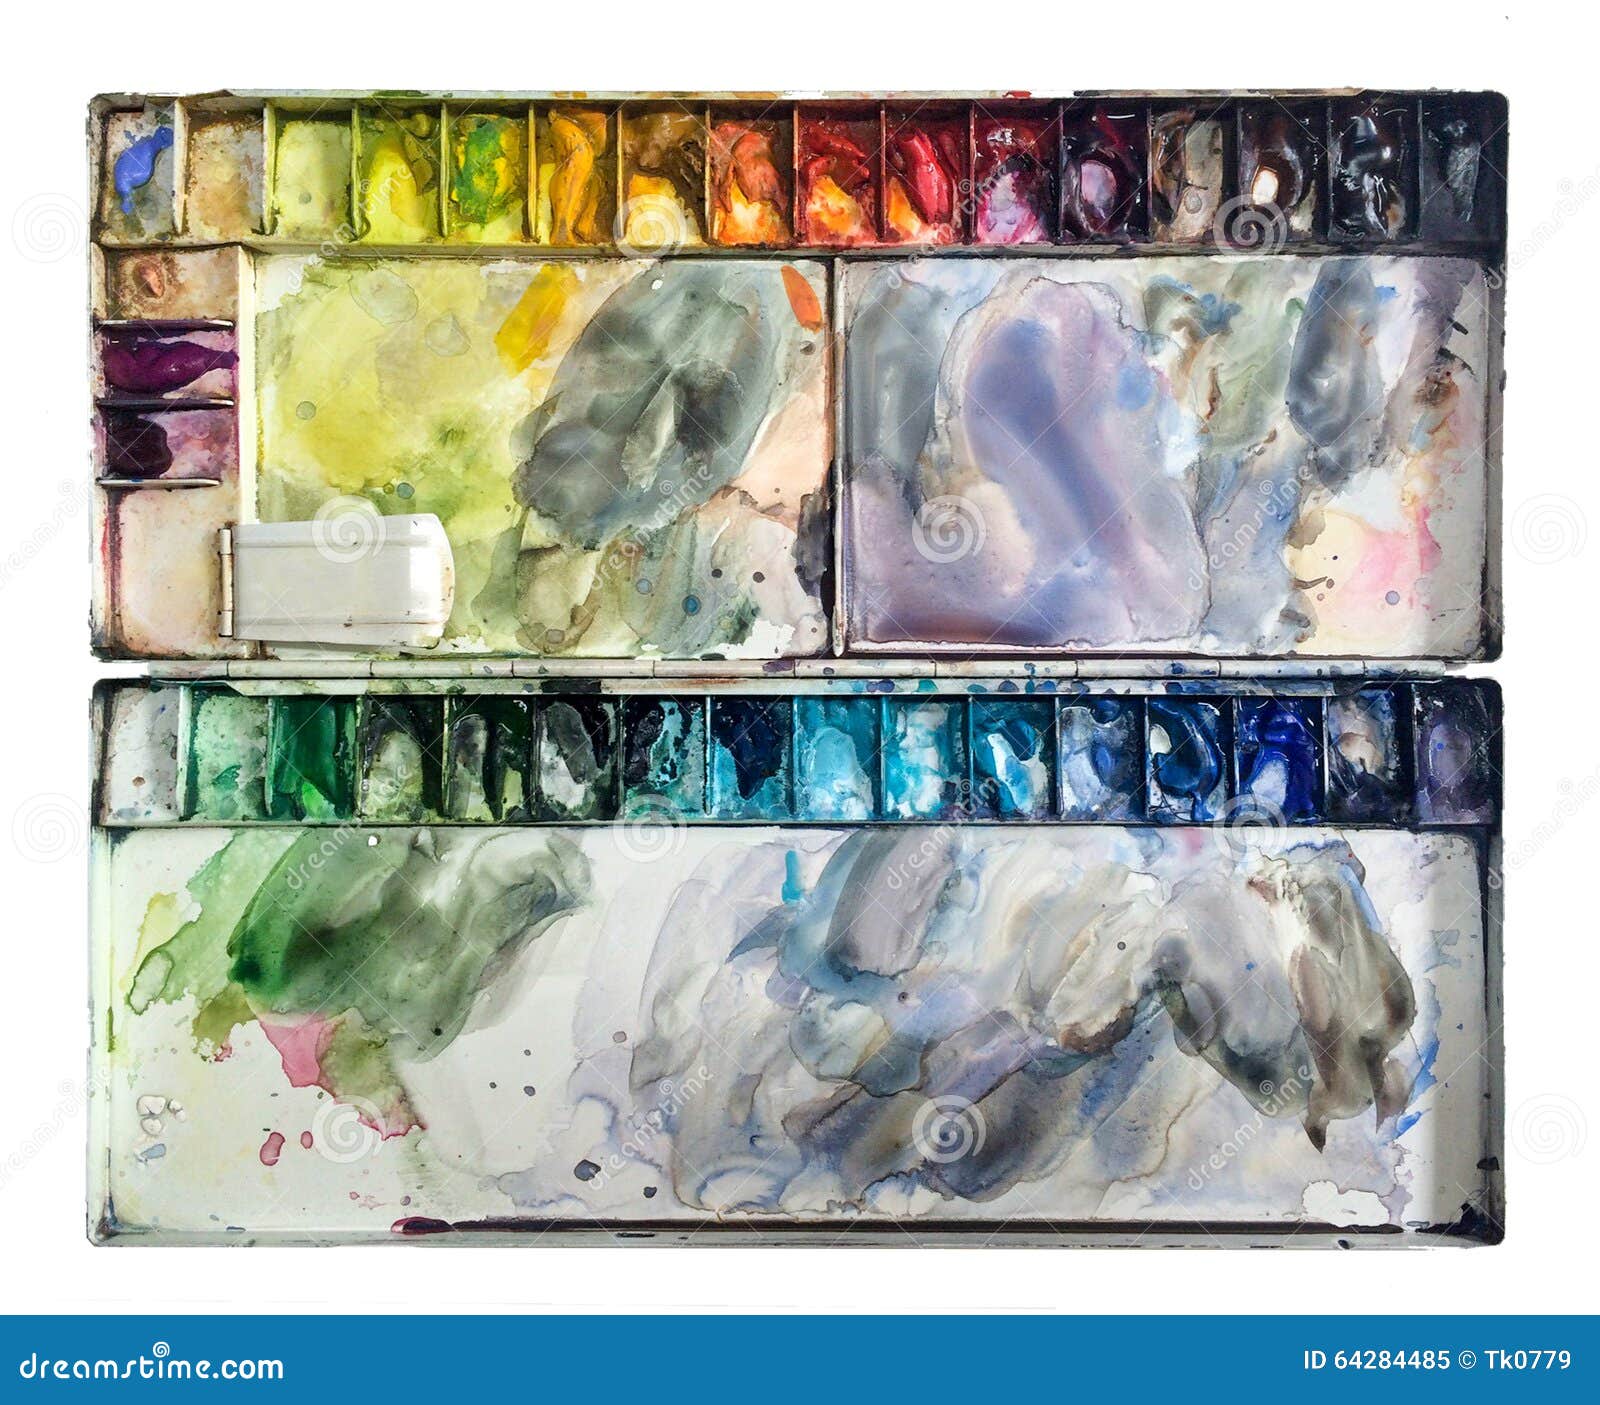 4,163 Watercolor Tray Images, Stock Photos, 3D objects, & Vectors